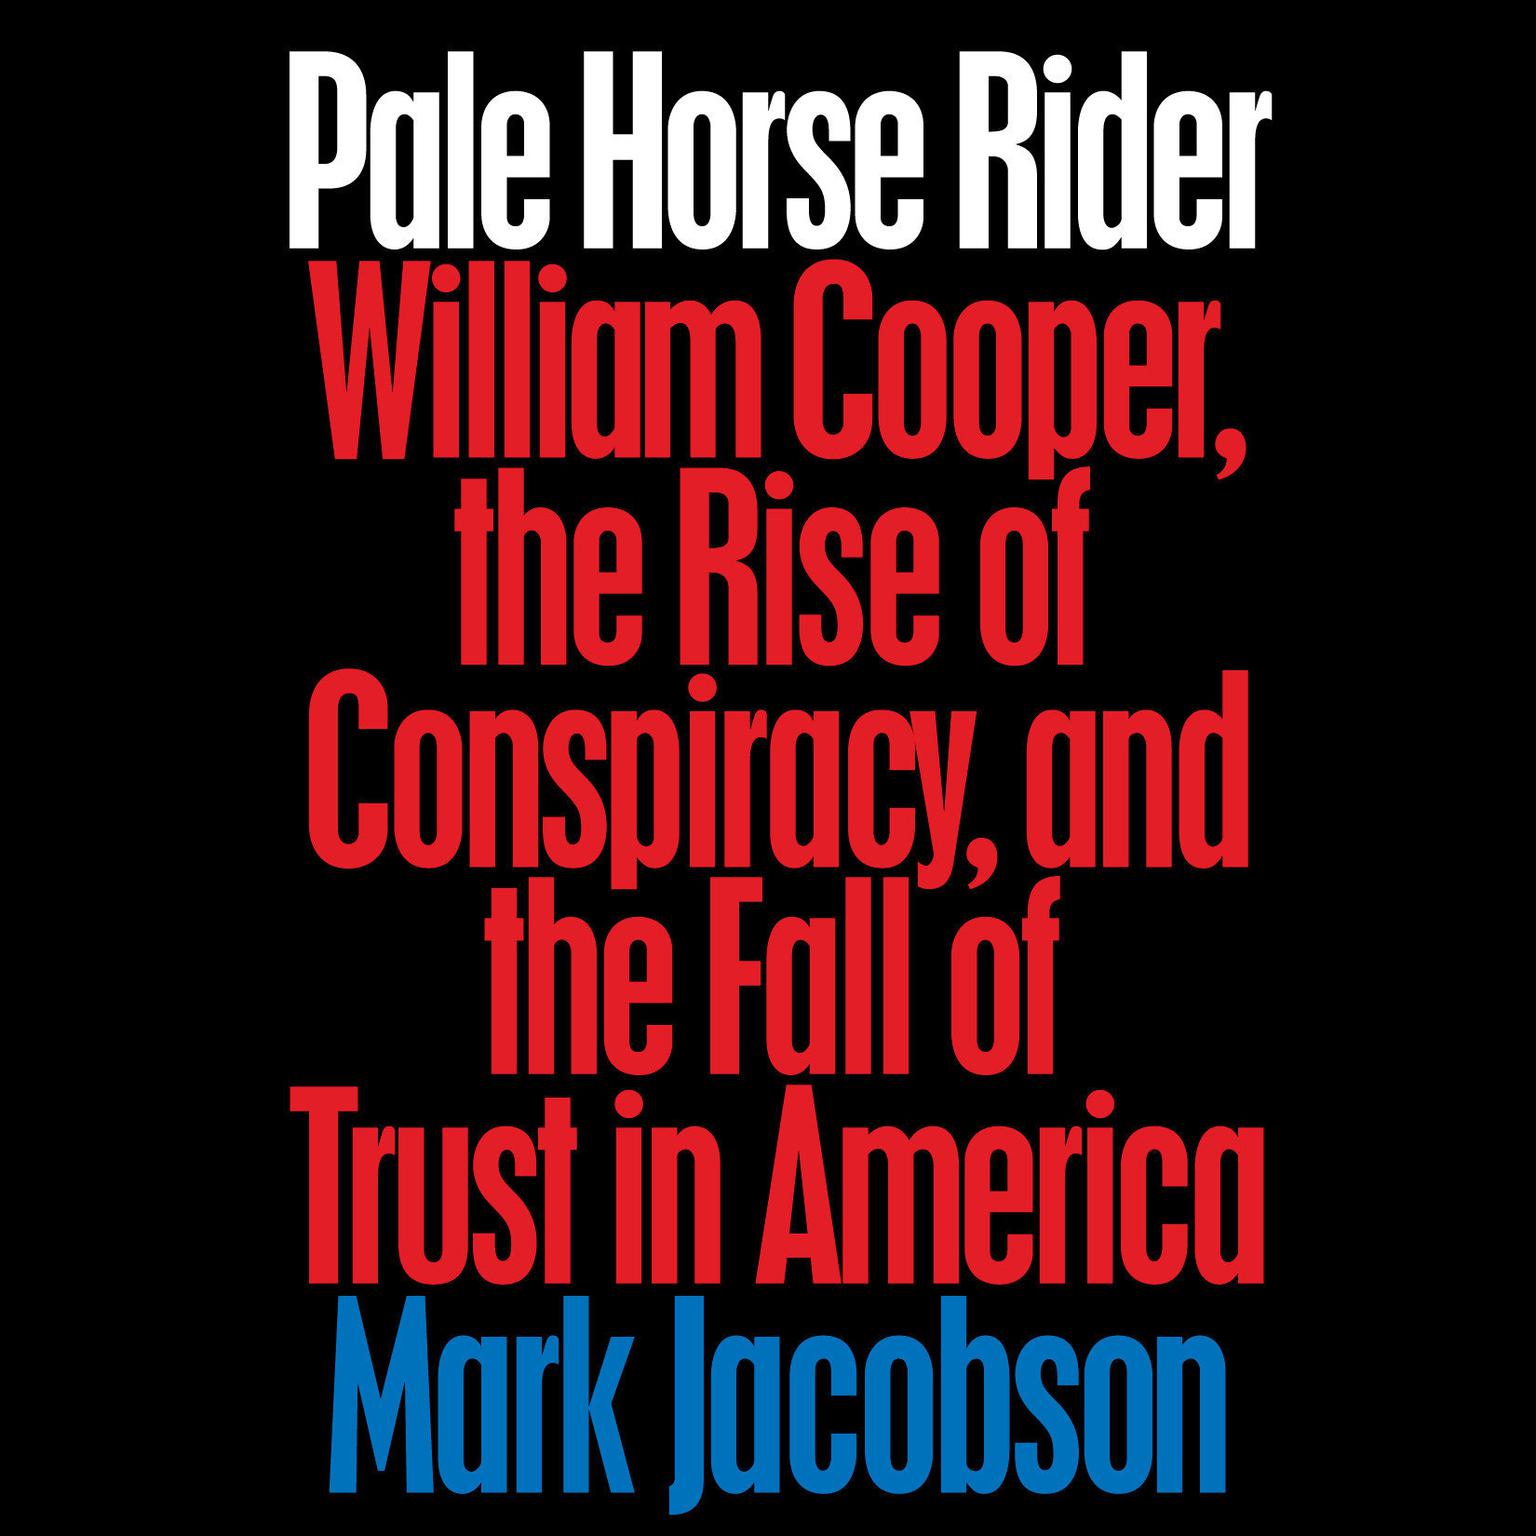 Pale Horse Rider: William Cooper, the Rise of Conspiracy, and the Fall of Trust in America Audiobook, by Mark Jacobson